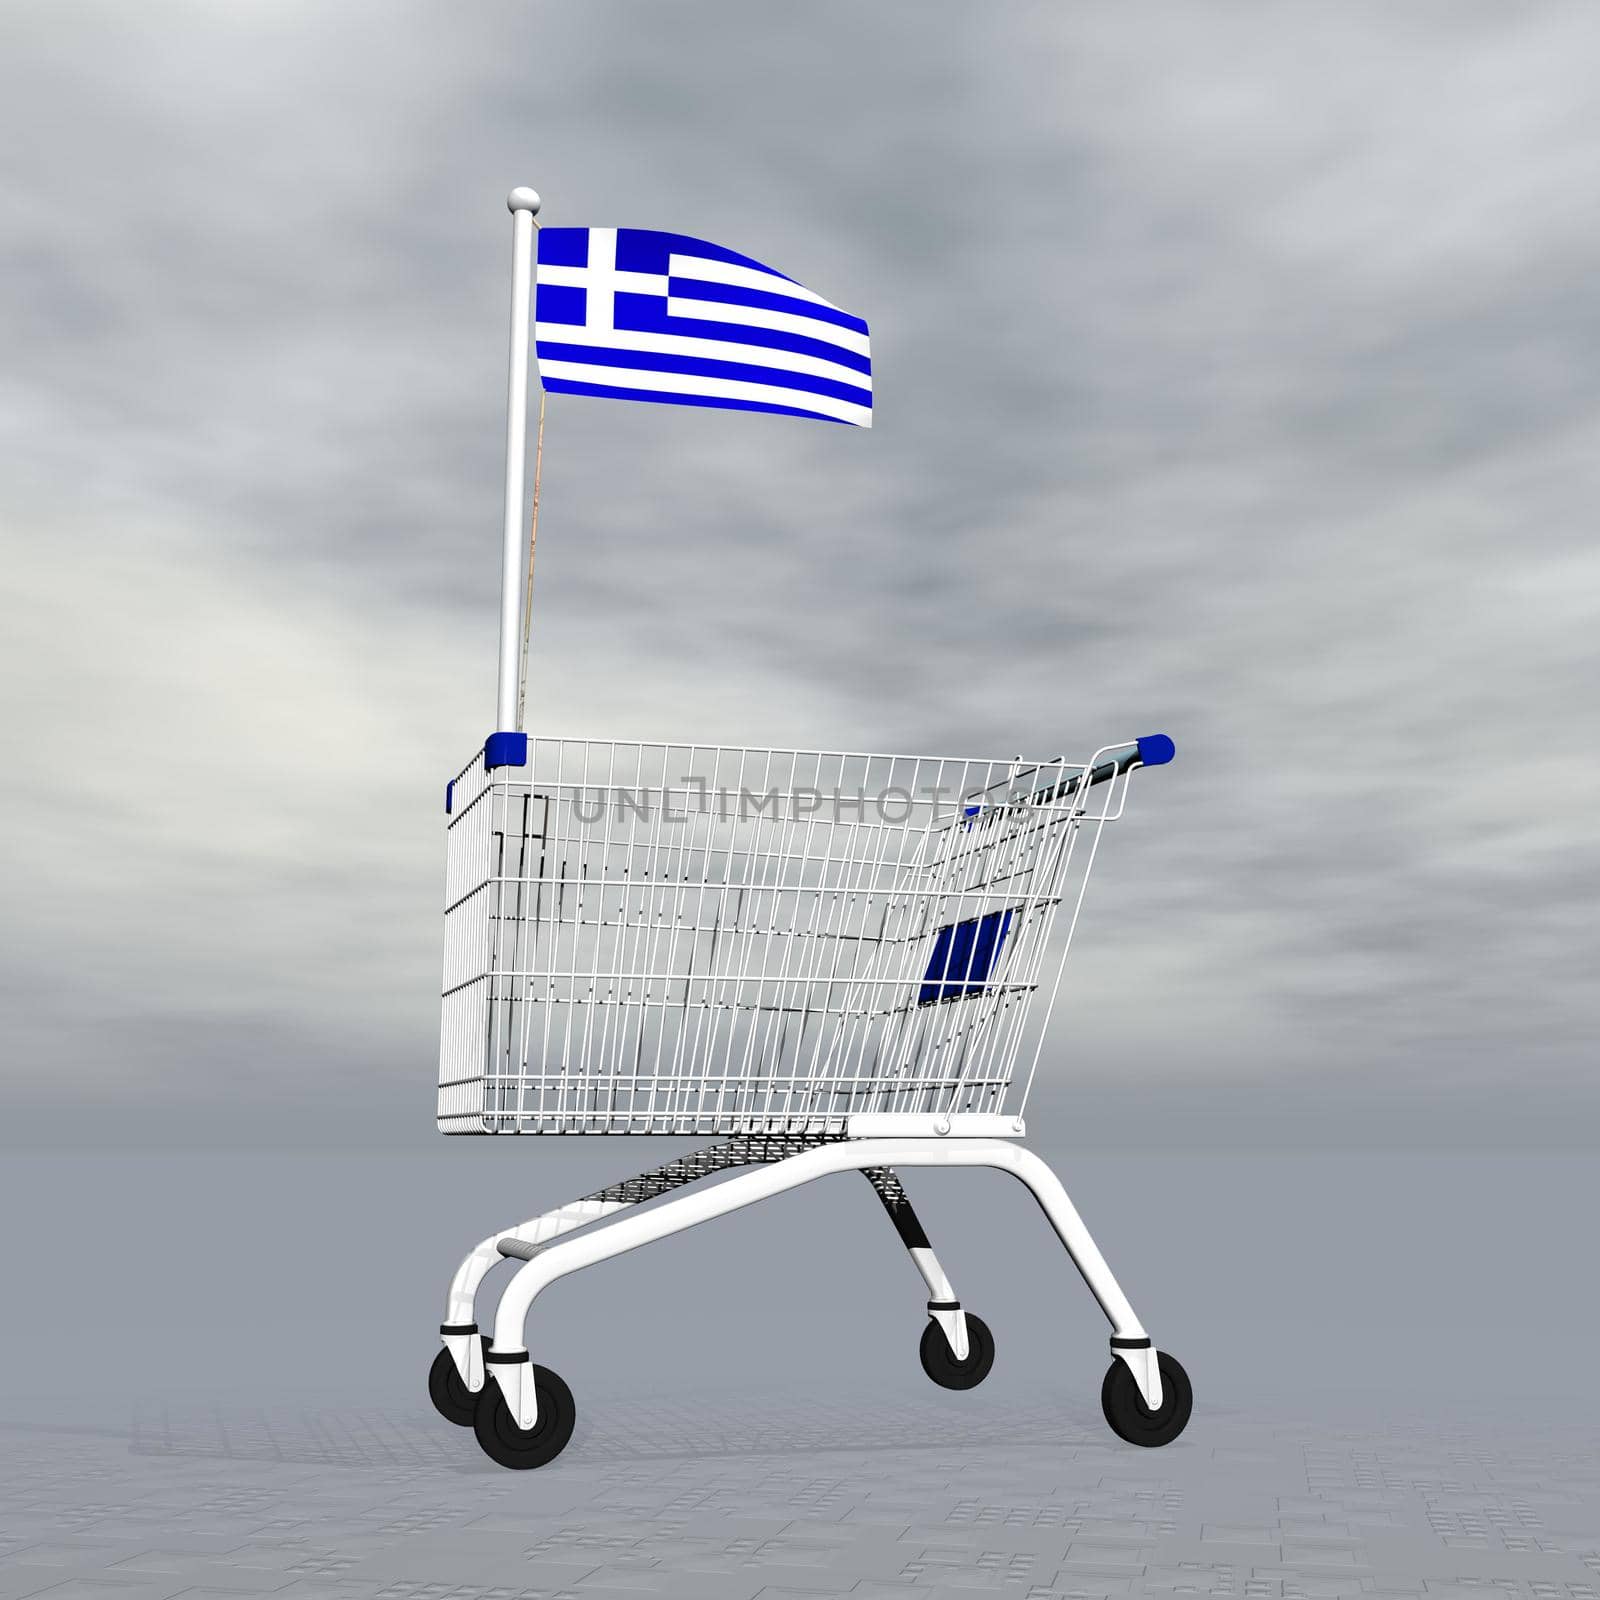 Shopping cart holding greek flag to symbolize commerce in Greece into grey cloudy background